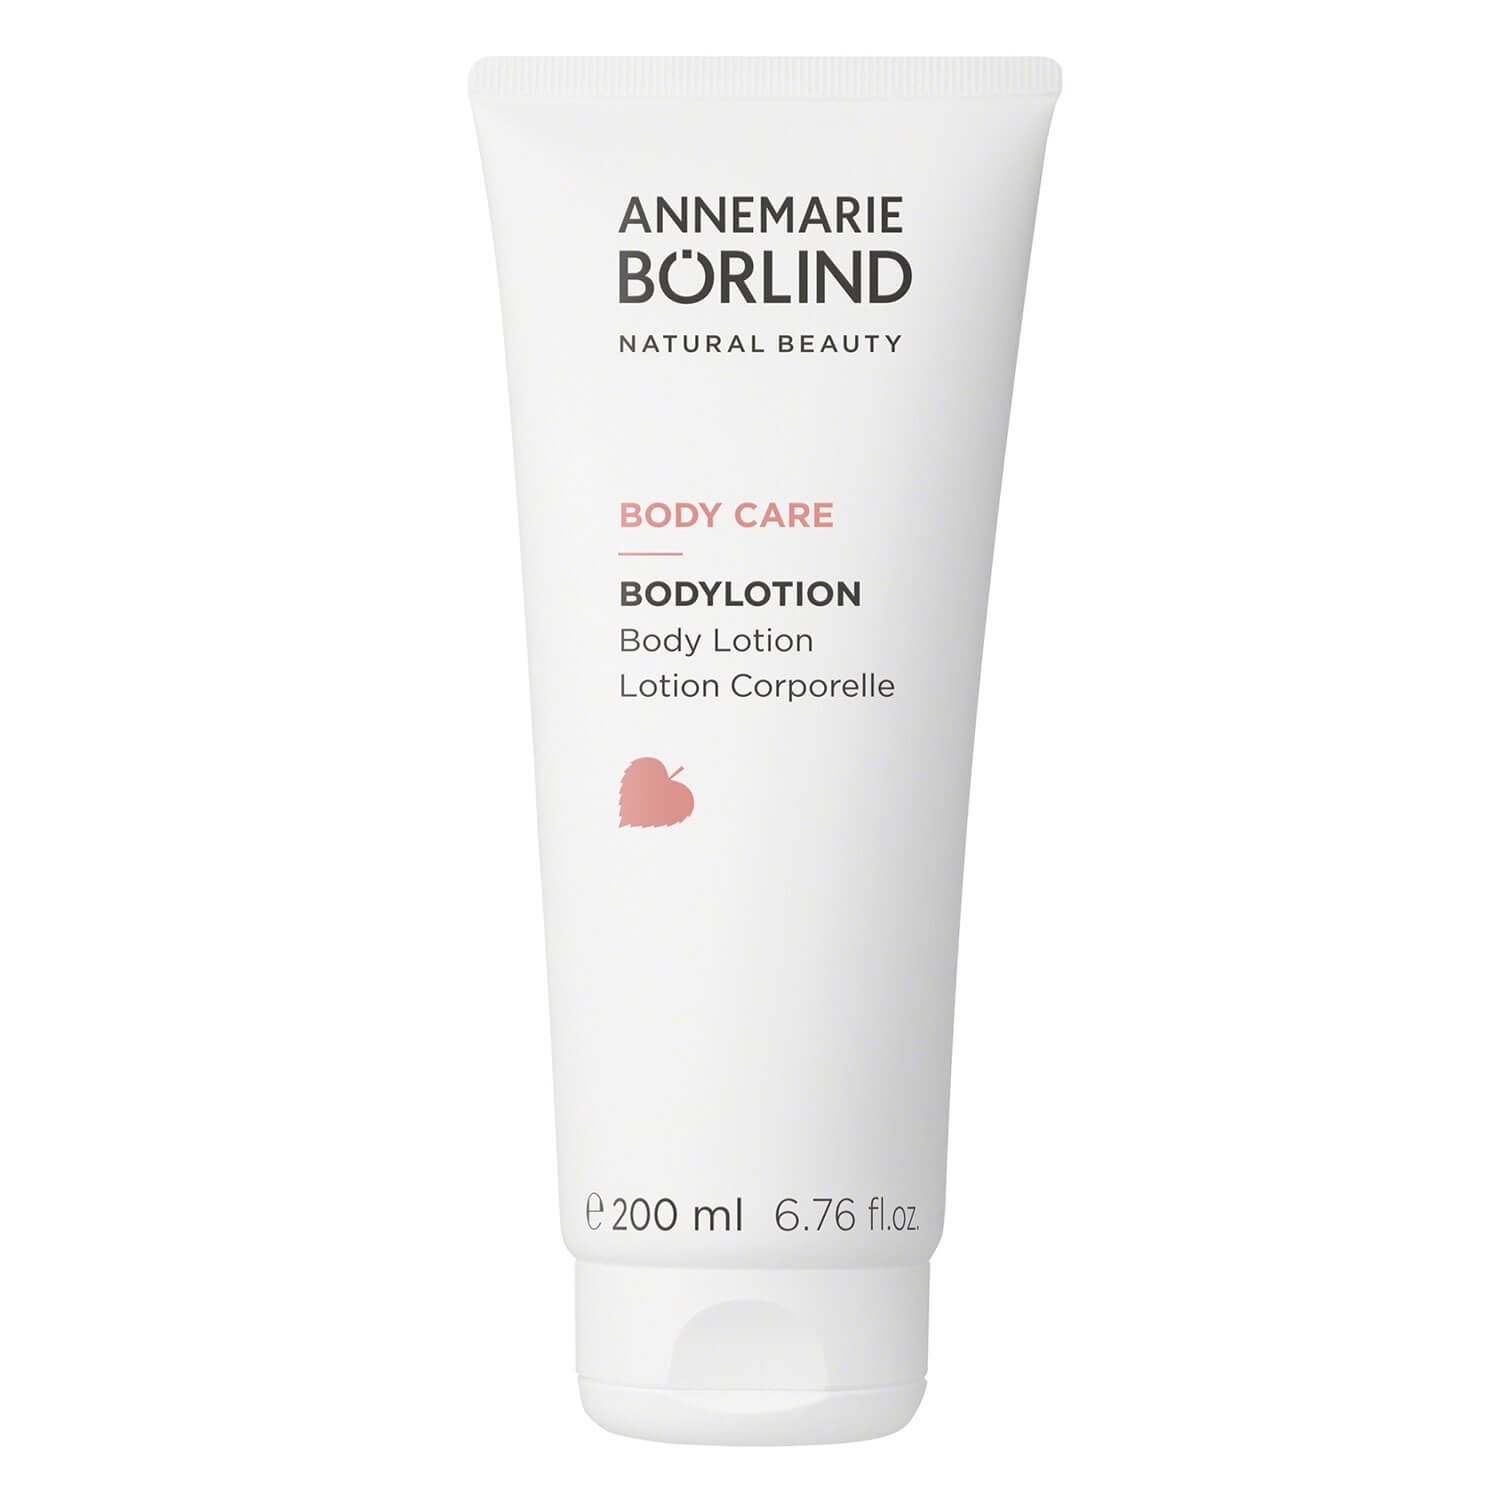 Product image from Annemarie Börlind Body Care - Bodylotion